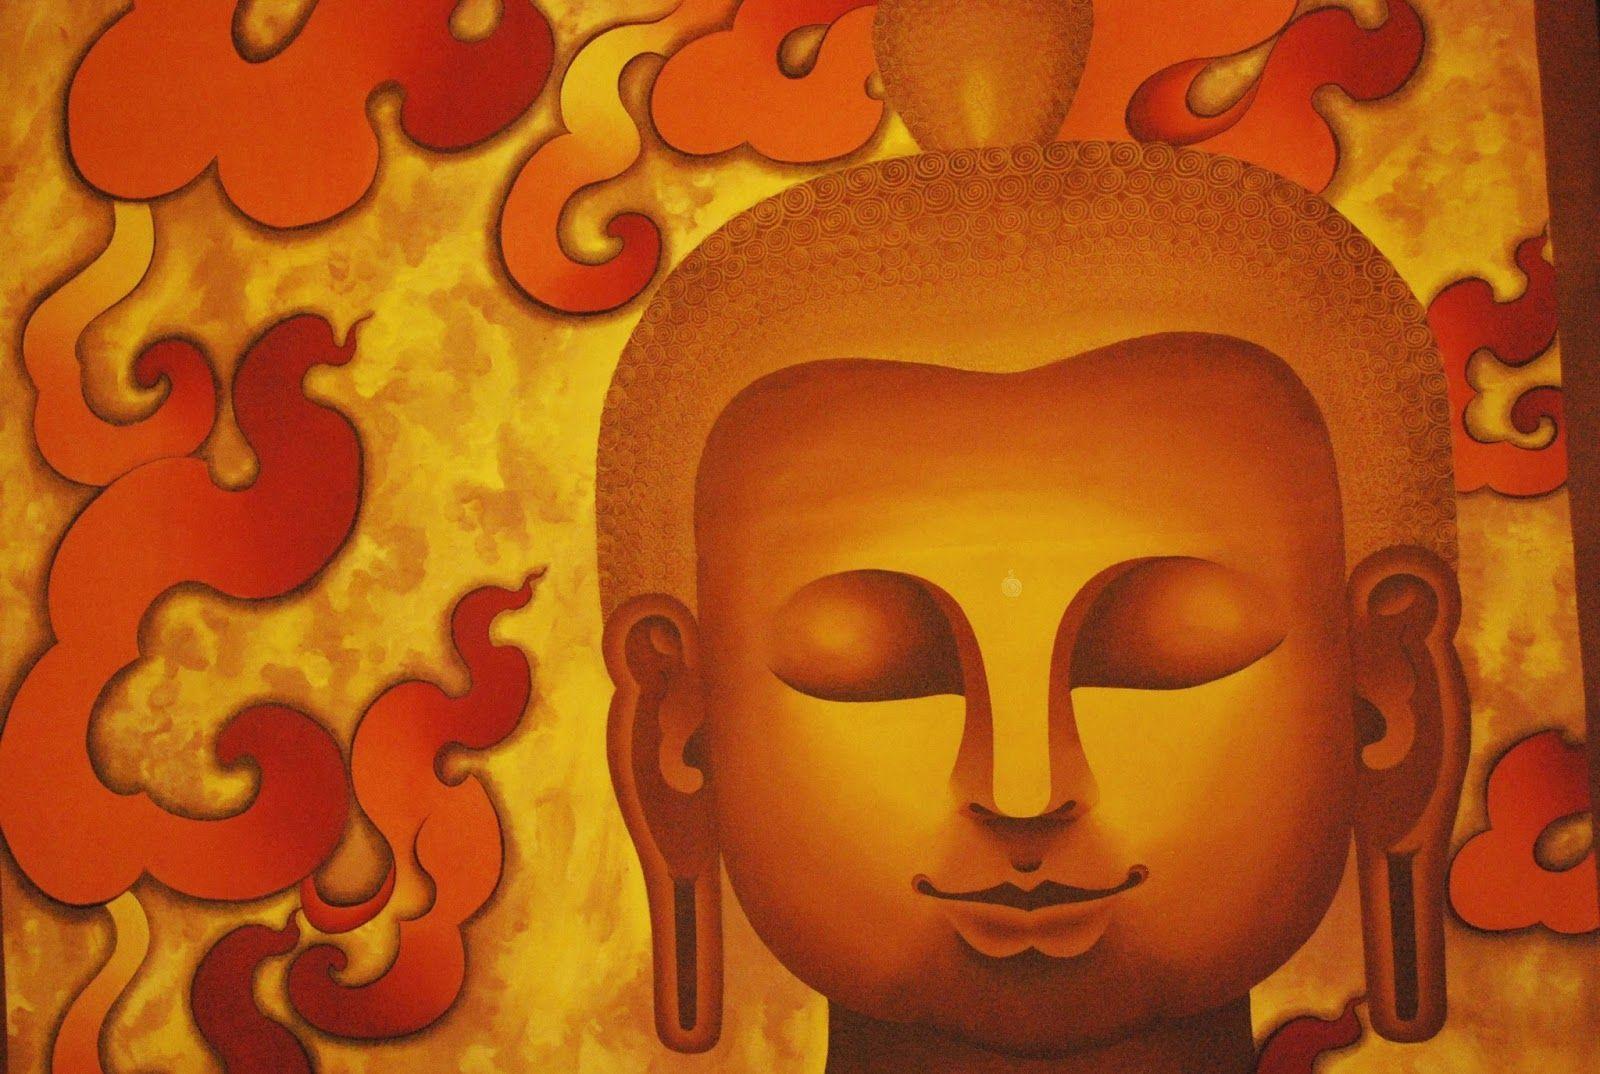 Lord Buddha face Art HD image and statue wallpaper